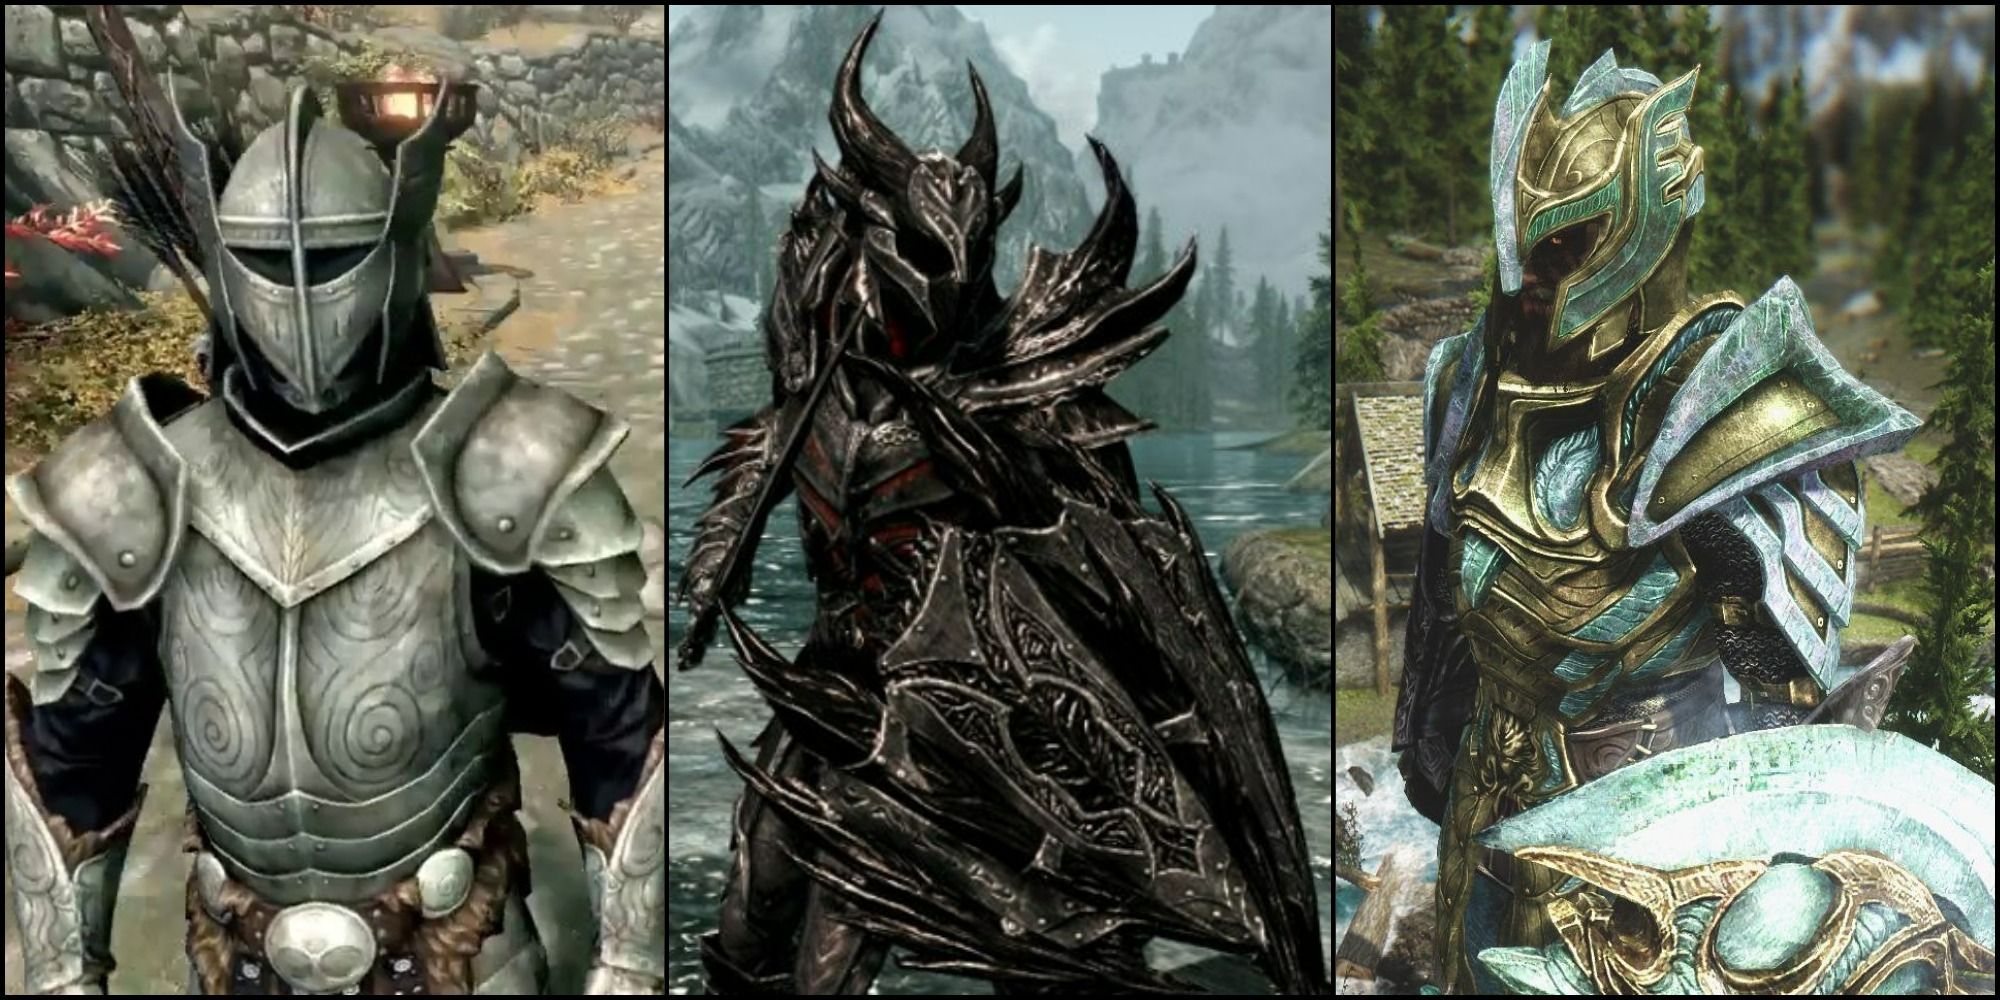 Skyrim split image featuring Steel Plate Armor to the left, Daedric Armor in the middle and Glass Armor to the right